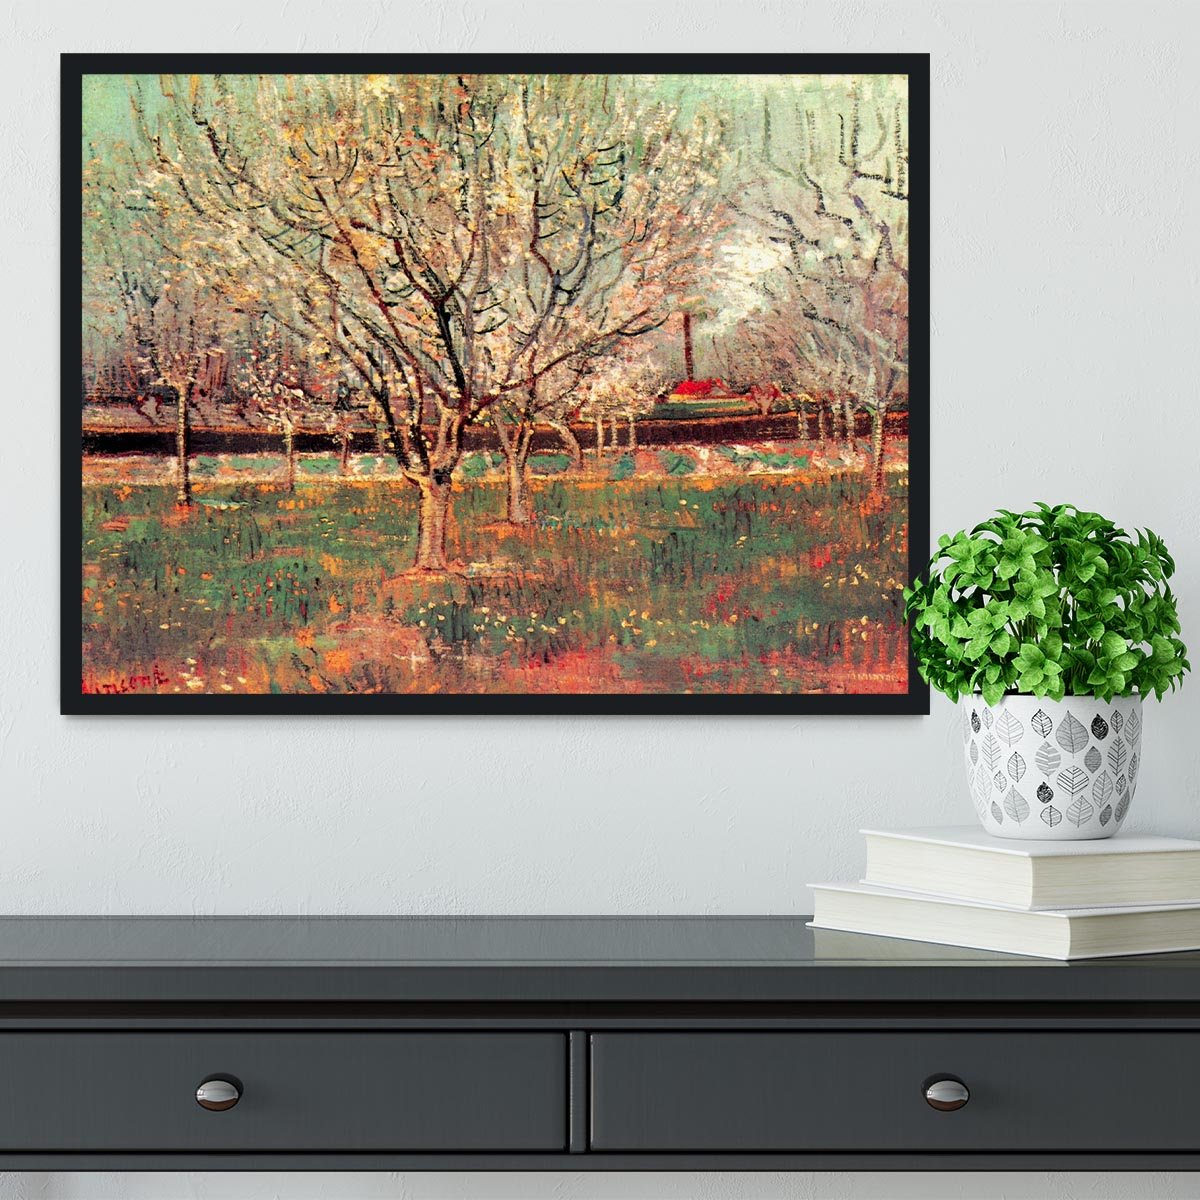 Orchard in Blossom Plum Trees by Van Gogh Framed Print - Canvas Art Rocks - 2